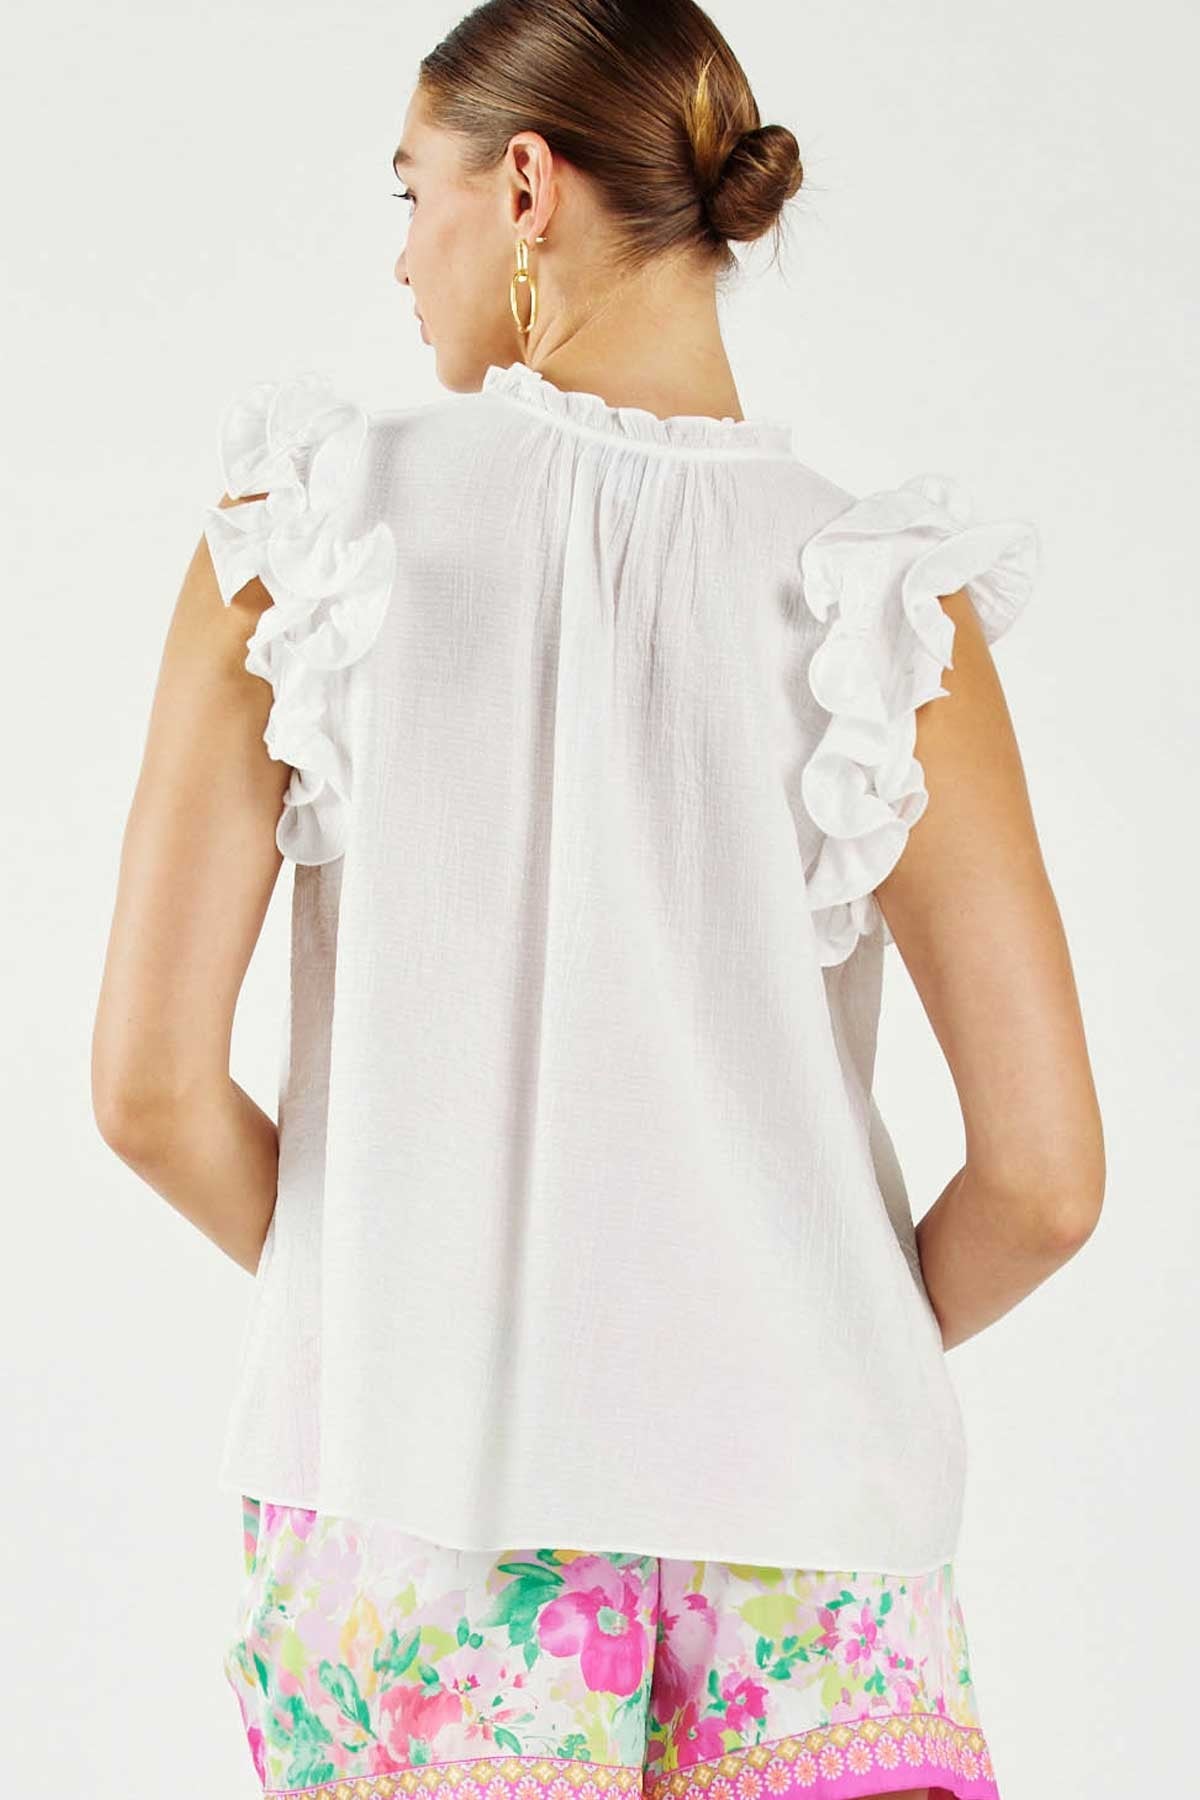 CURRENT AIR TOP DOUBLE RUFFLE